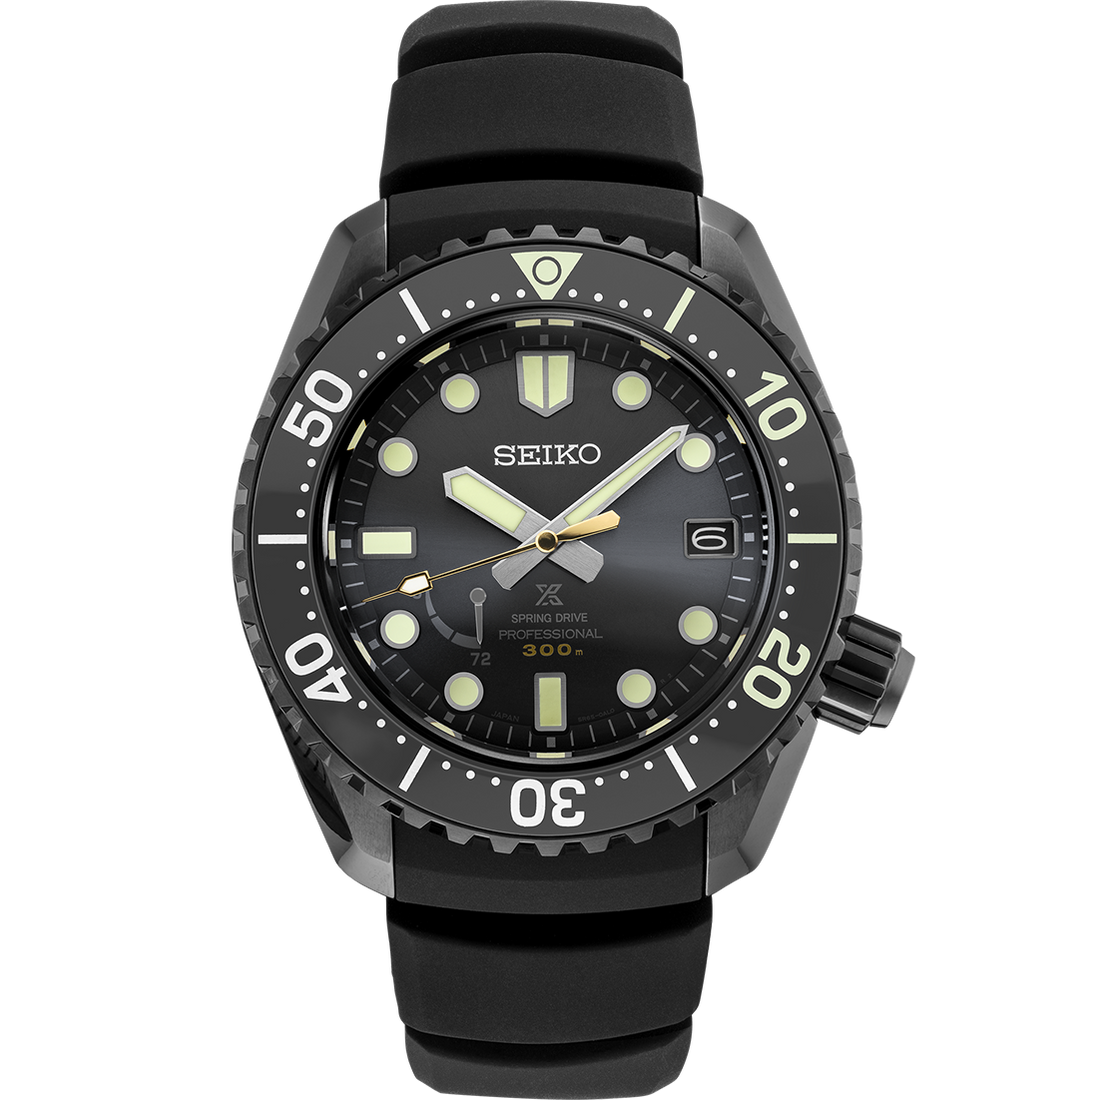 Seiko Prospex LX SNR043 Spring Drive Limited Edition Diver Watch